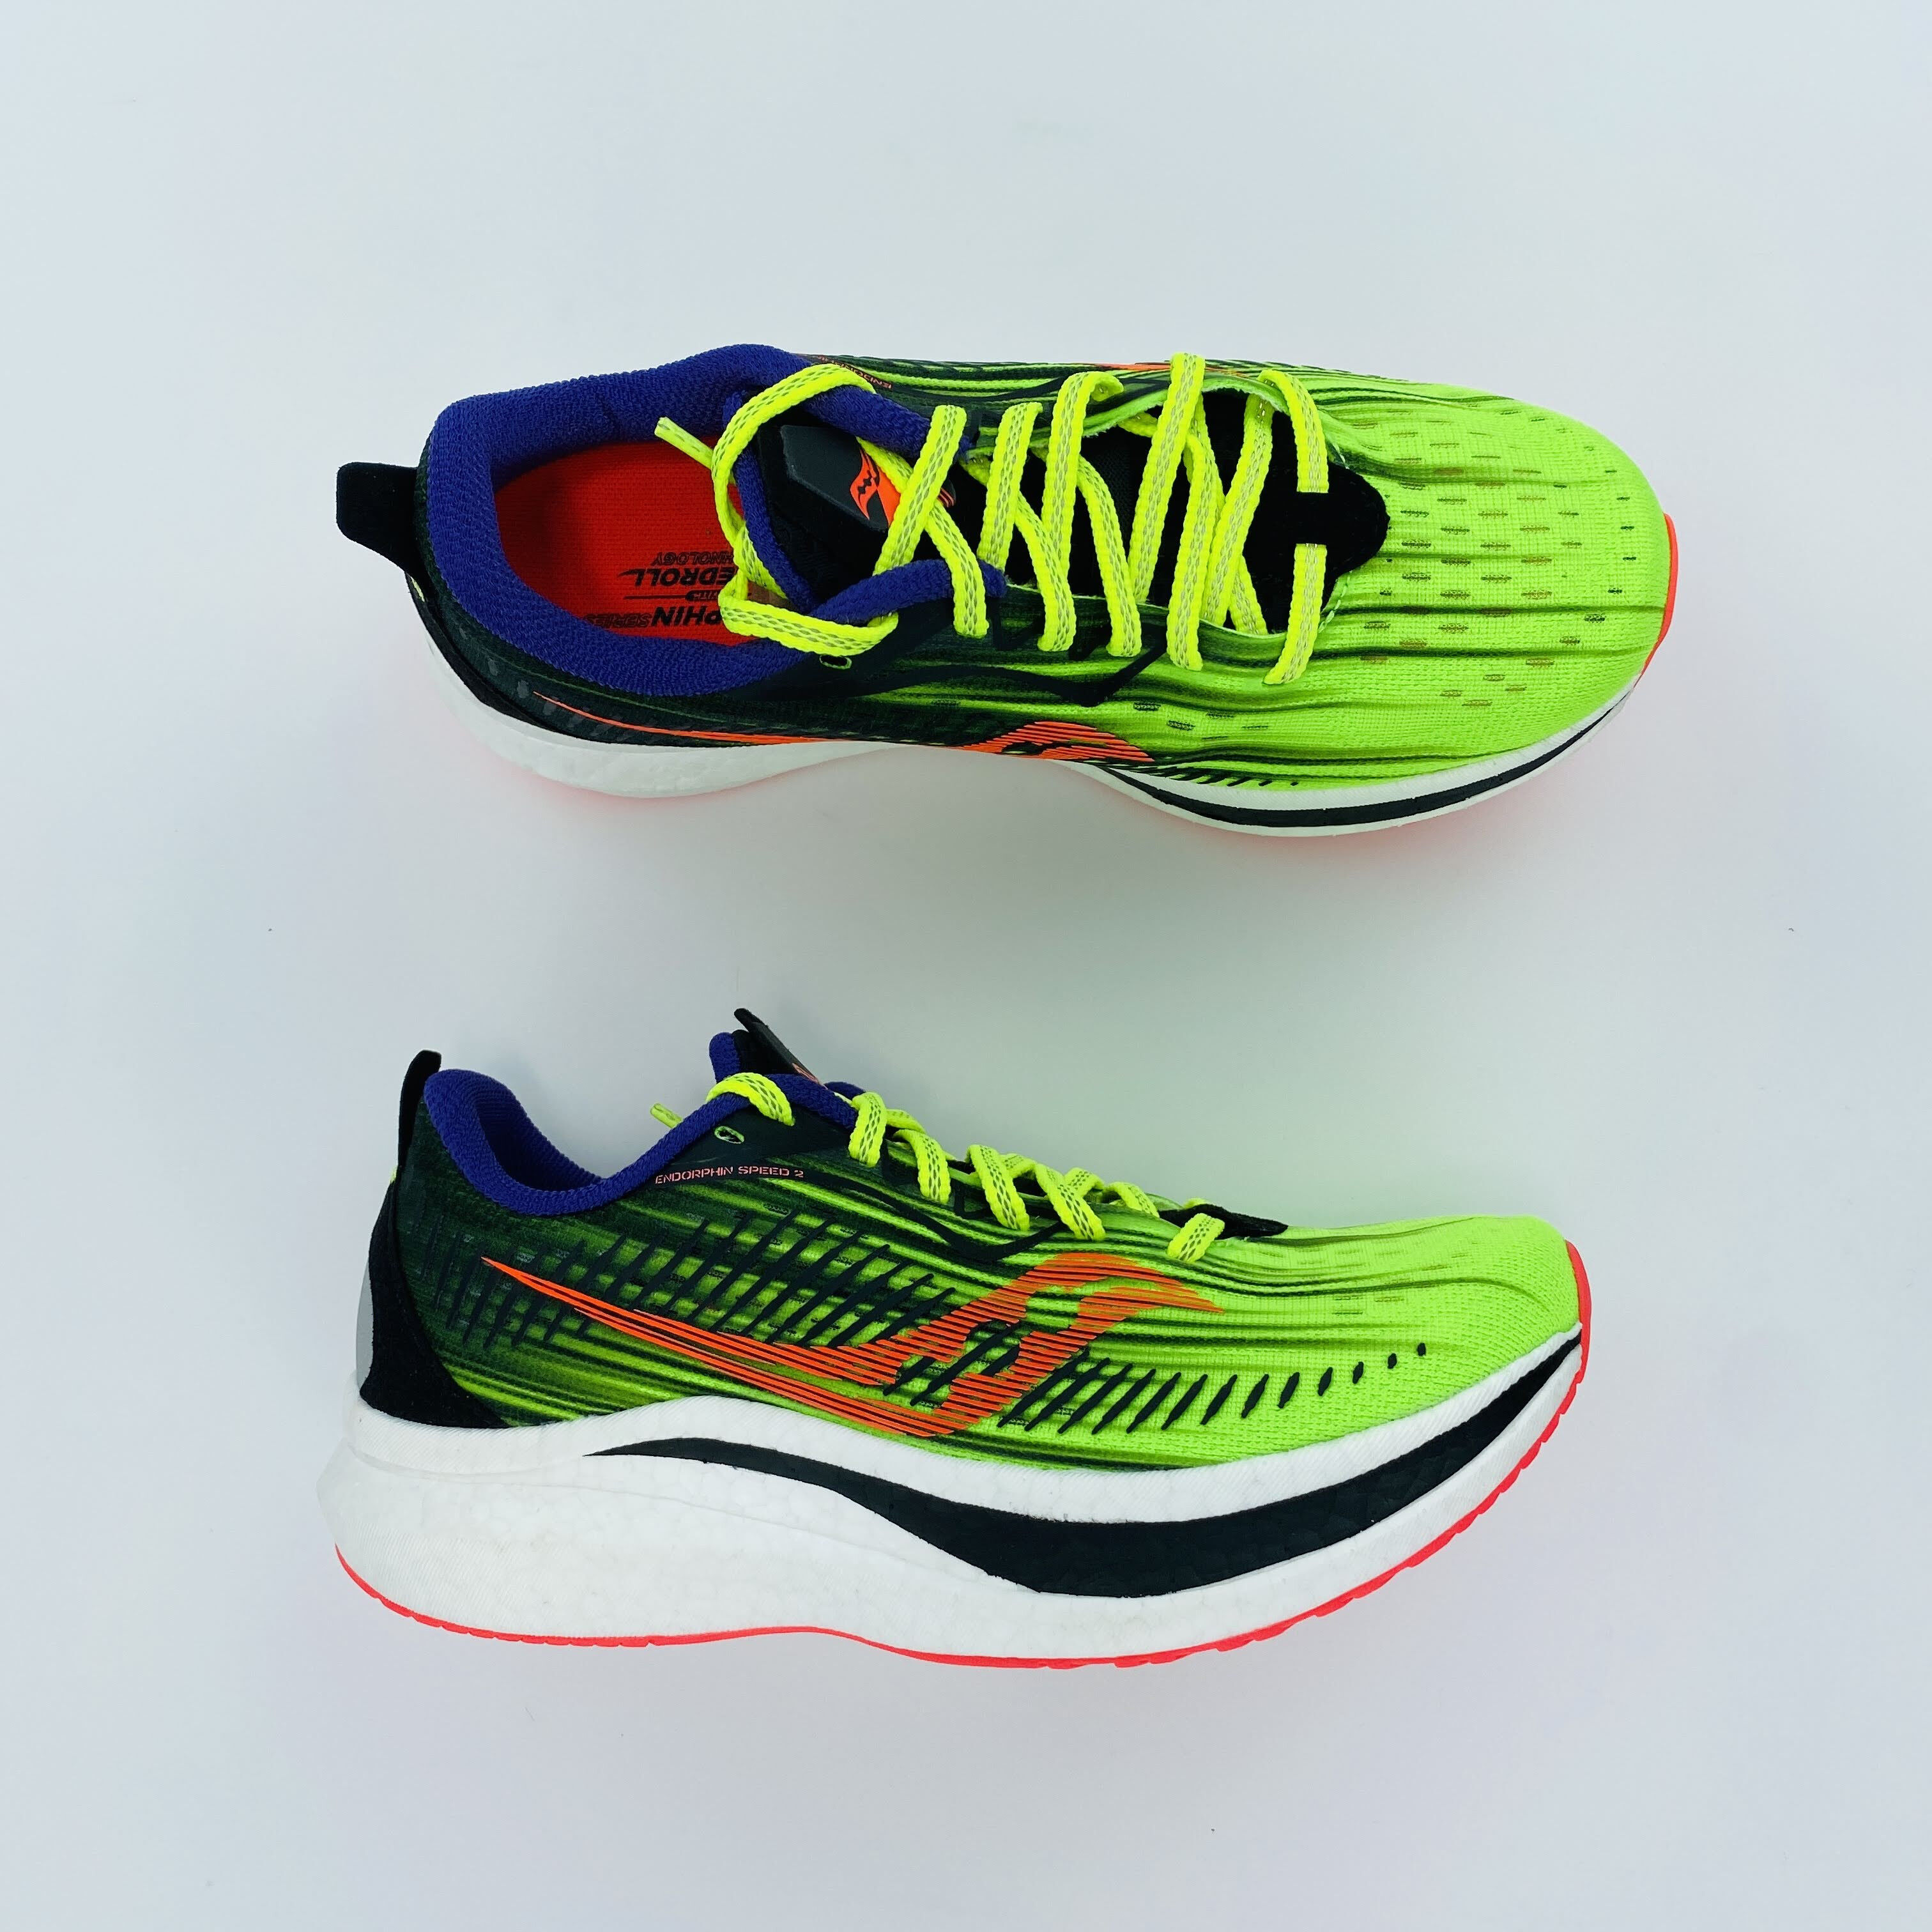 Saucony Endorphin Speed 2 W - Seconde main Chaussures running femme - Multicolore - 38.5 | Hardloop